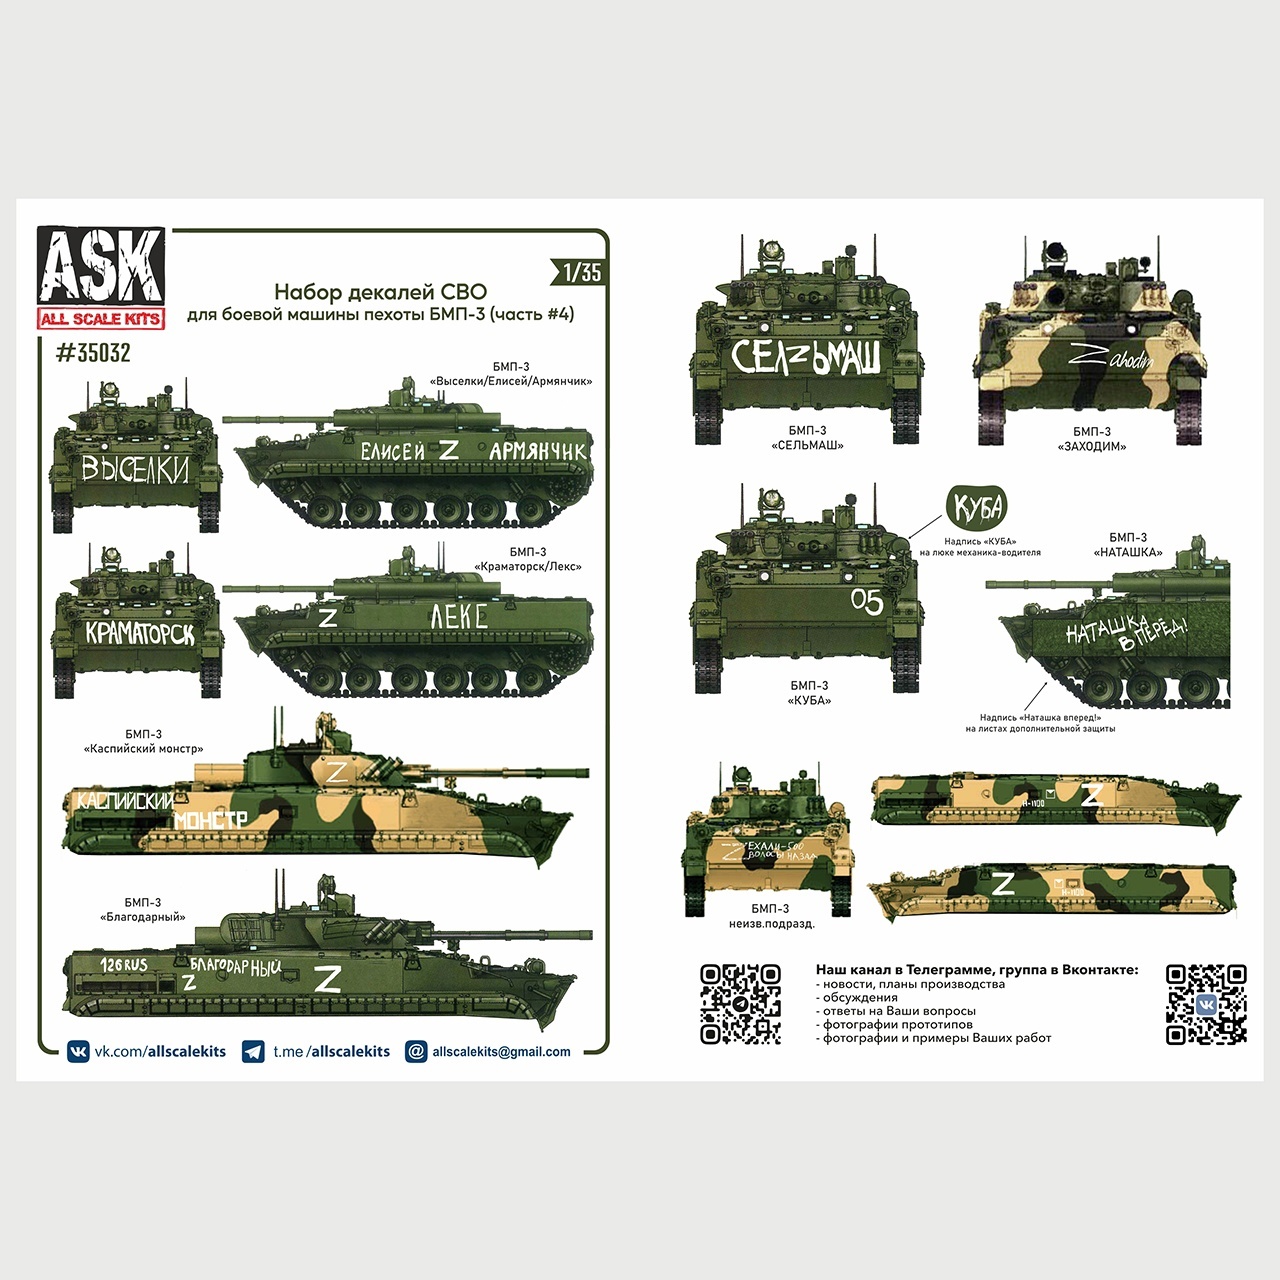 ASK35032 All Scale Kits (ASK) 1/35 Set of decals for infantry fighting vehicle BMP-3 in the area of SVO (part 4)